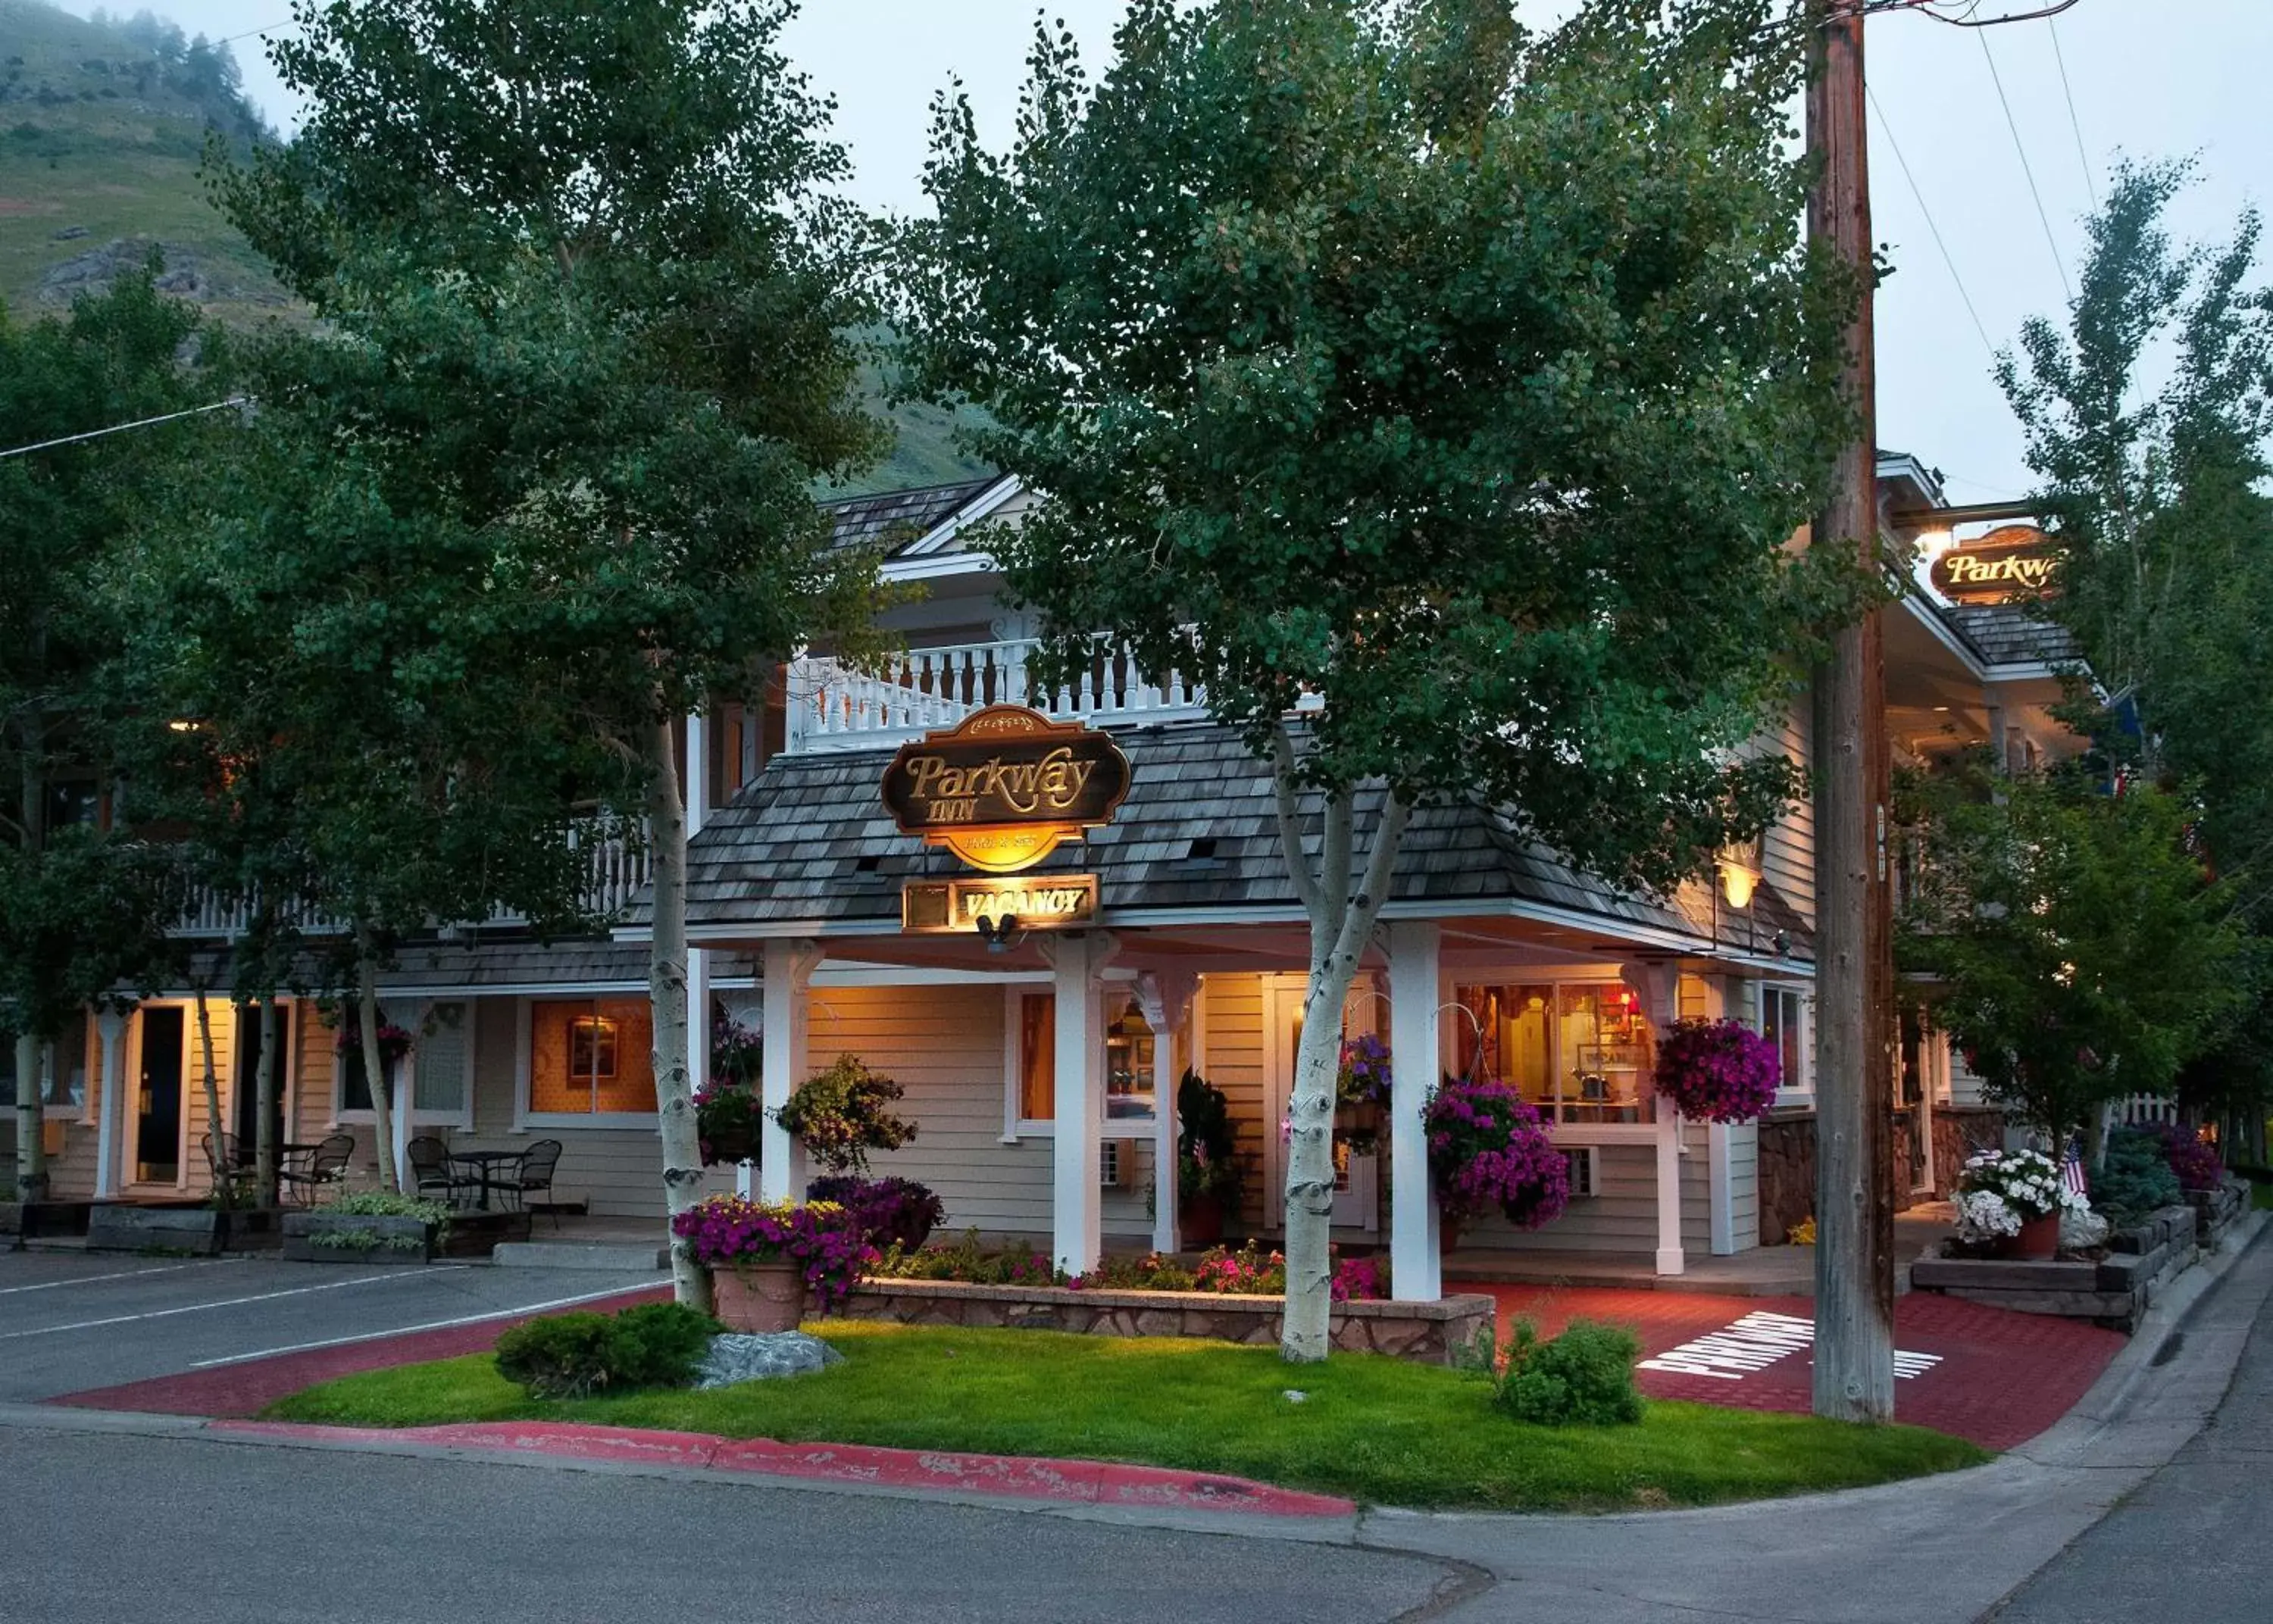 Property building in Parkway Inn of Jackson Hole